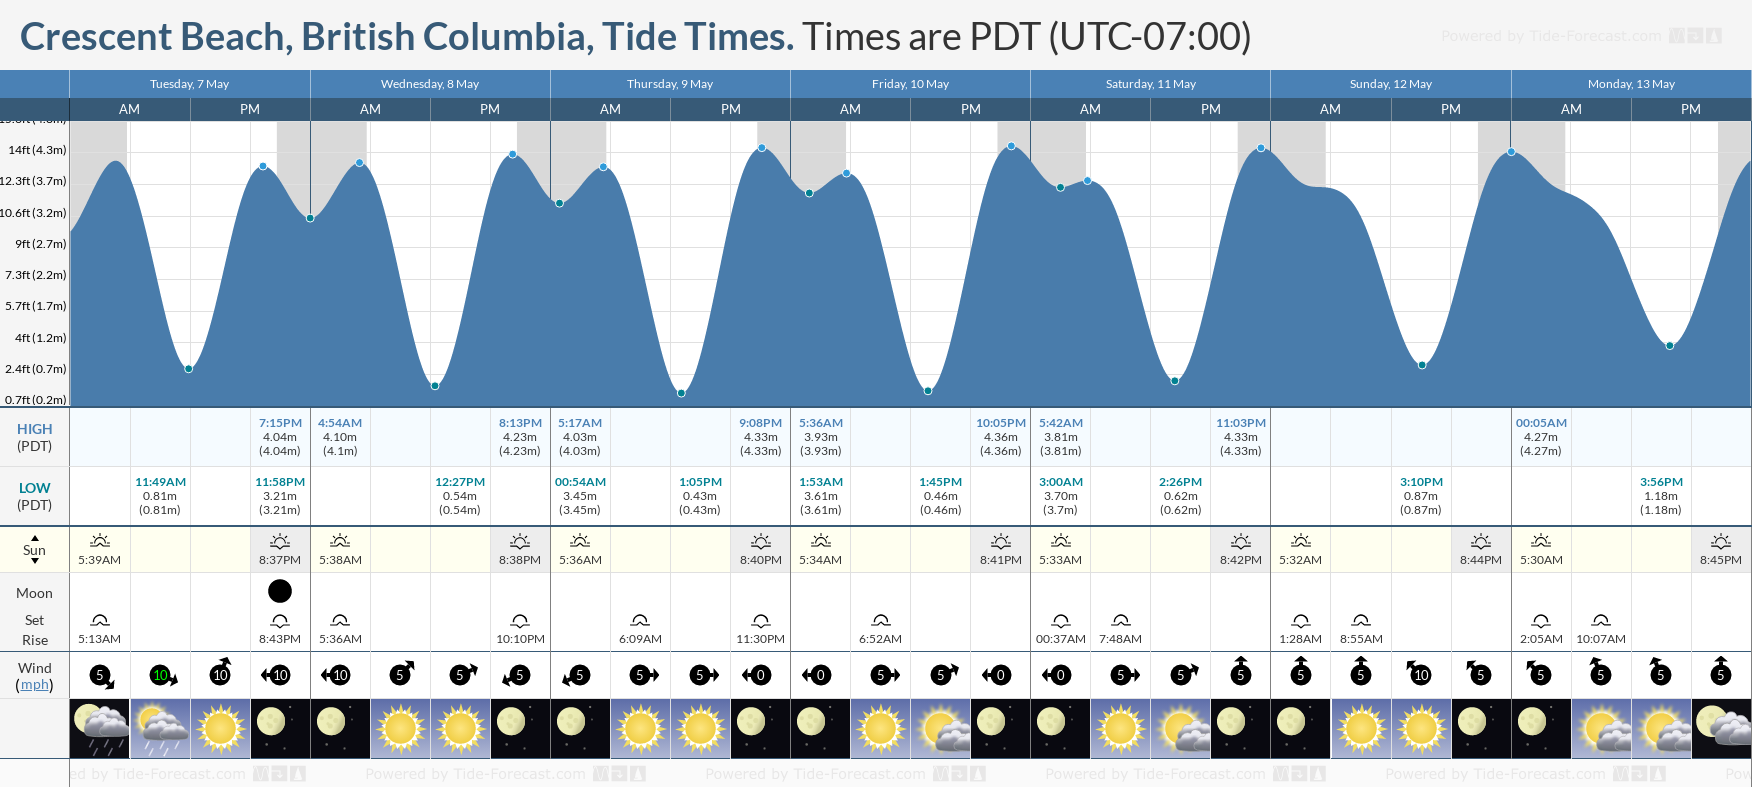 Crescent Beach, British Columbia Tide Chart including high and low tide tide times for the next 7 days